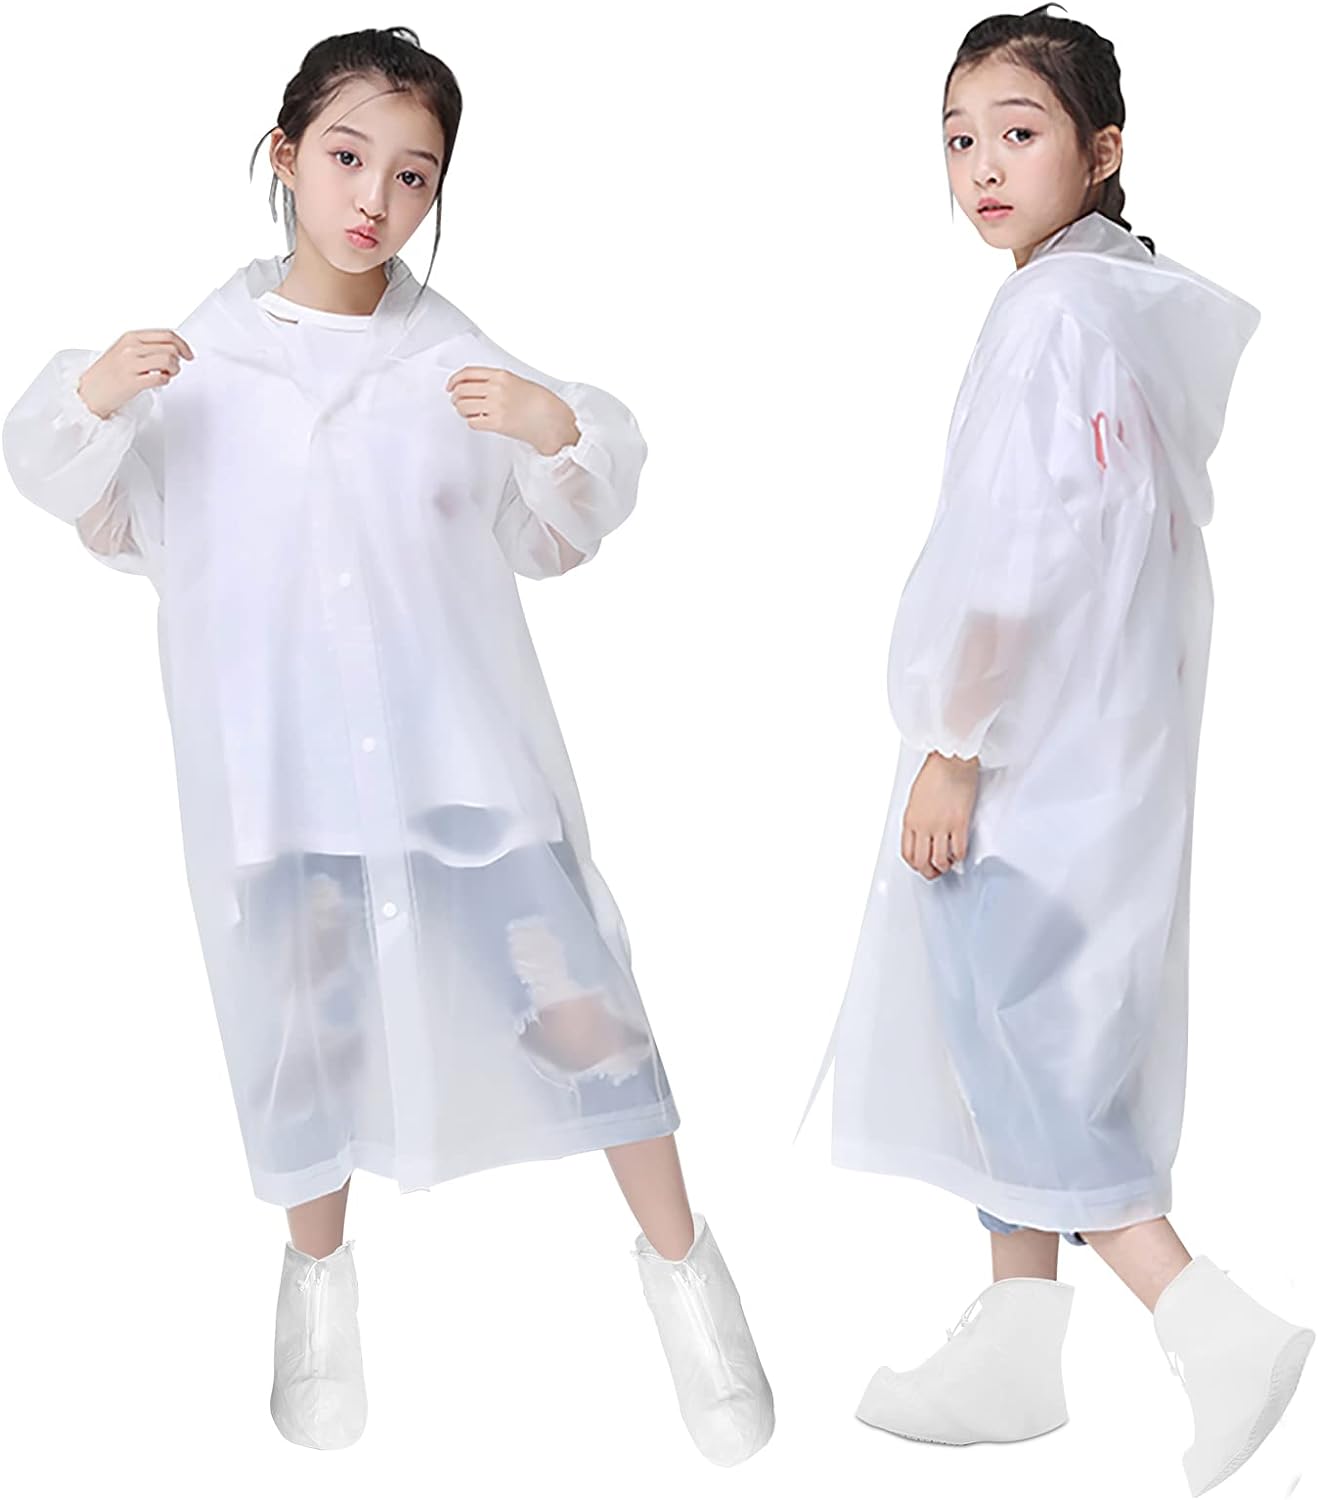 Mafomil EVA Rain Ponchos for Kid Adults, Reusable Portable Rain Poncho with Waterproof Shoe Covers Poncho with Hood Emergency